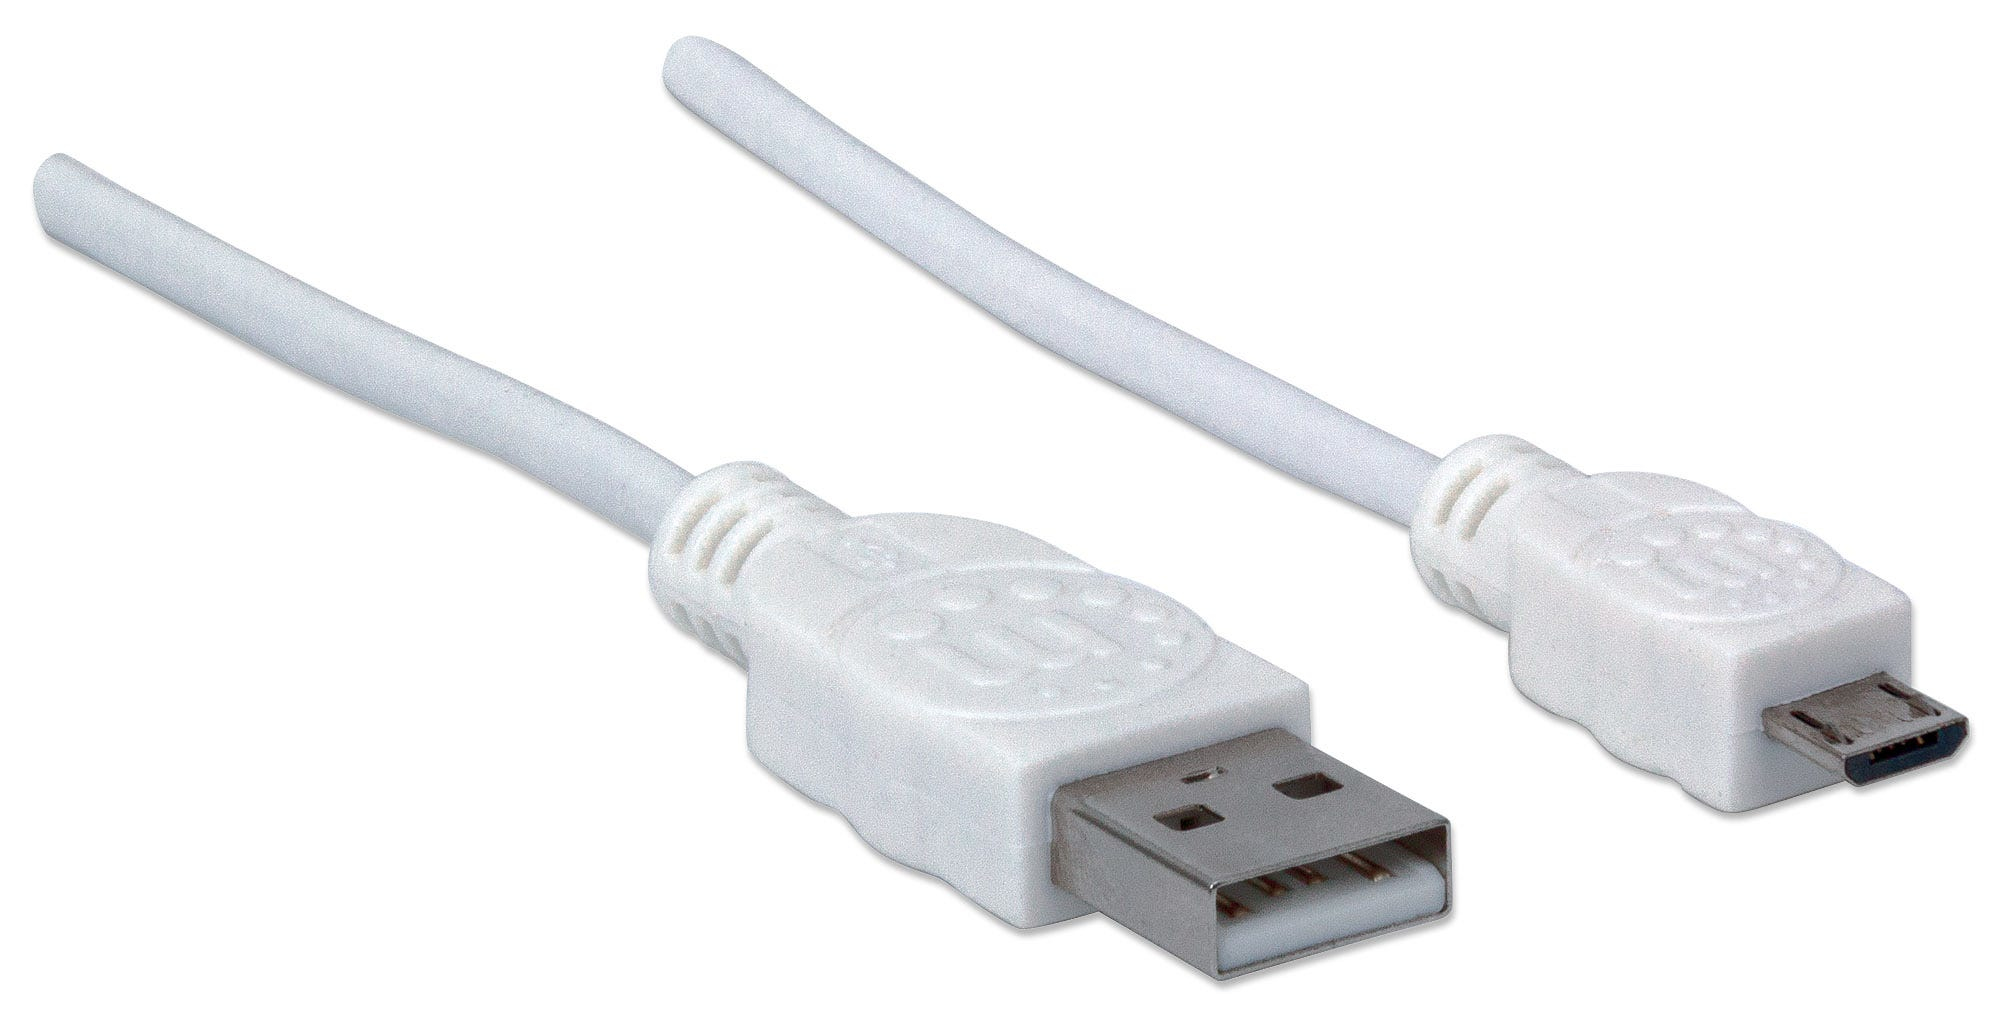 Manhattan USB-A to Micro-USB Cable, 1.8m, Male to Male, 480 Mbps (USB 2.0), White, Polybag